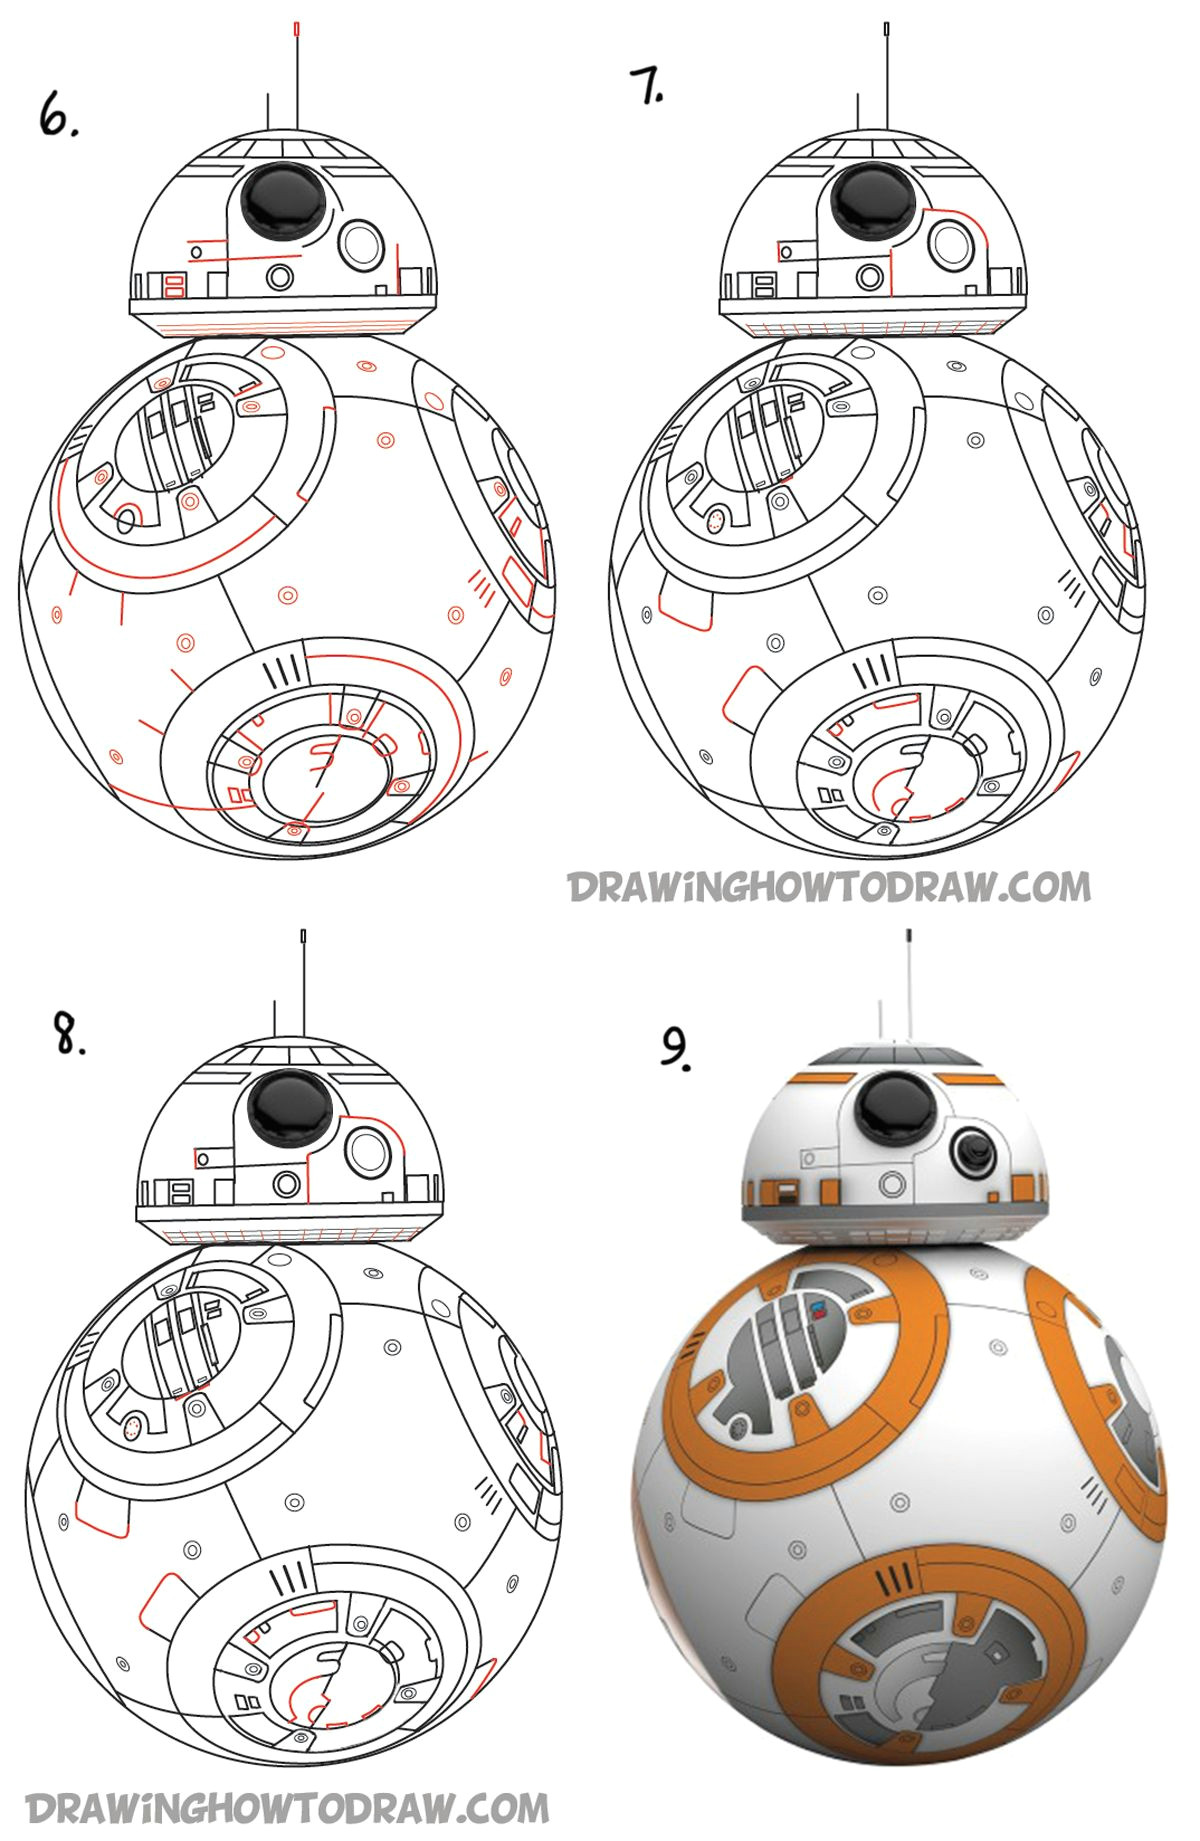 Easy Draw Star Wars How to Draw Bb 8 Beeby ate Droid From Star Wars Drawing